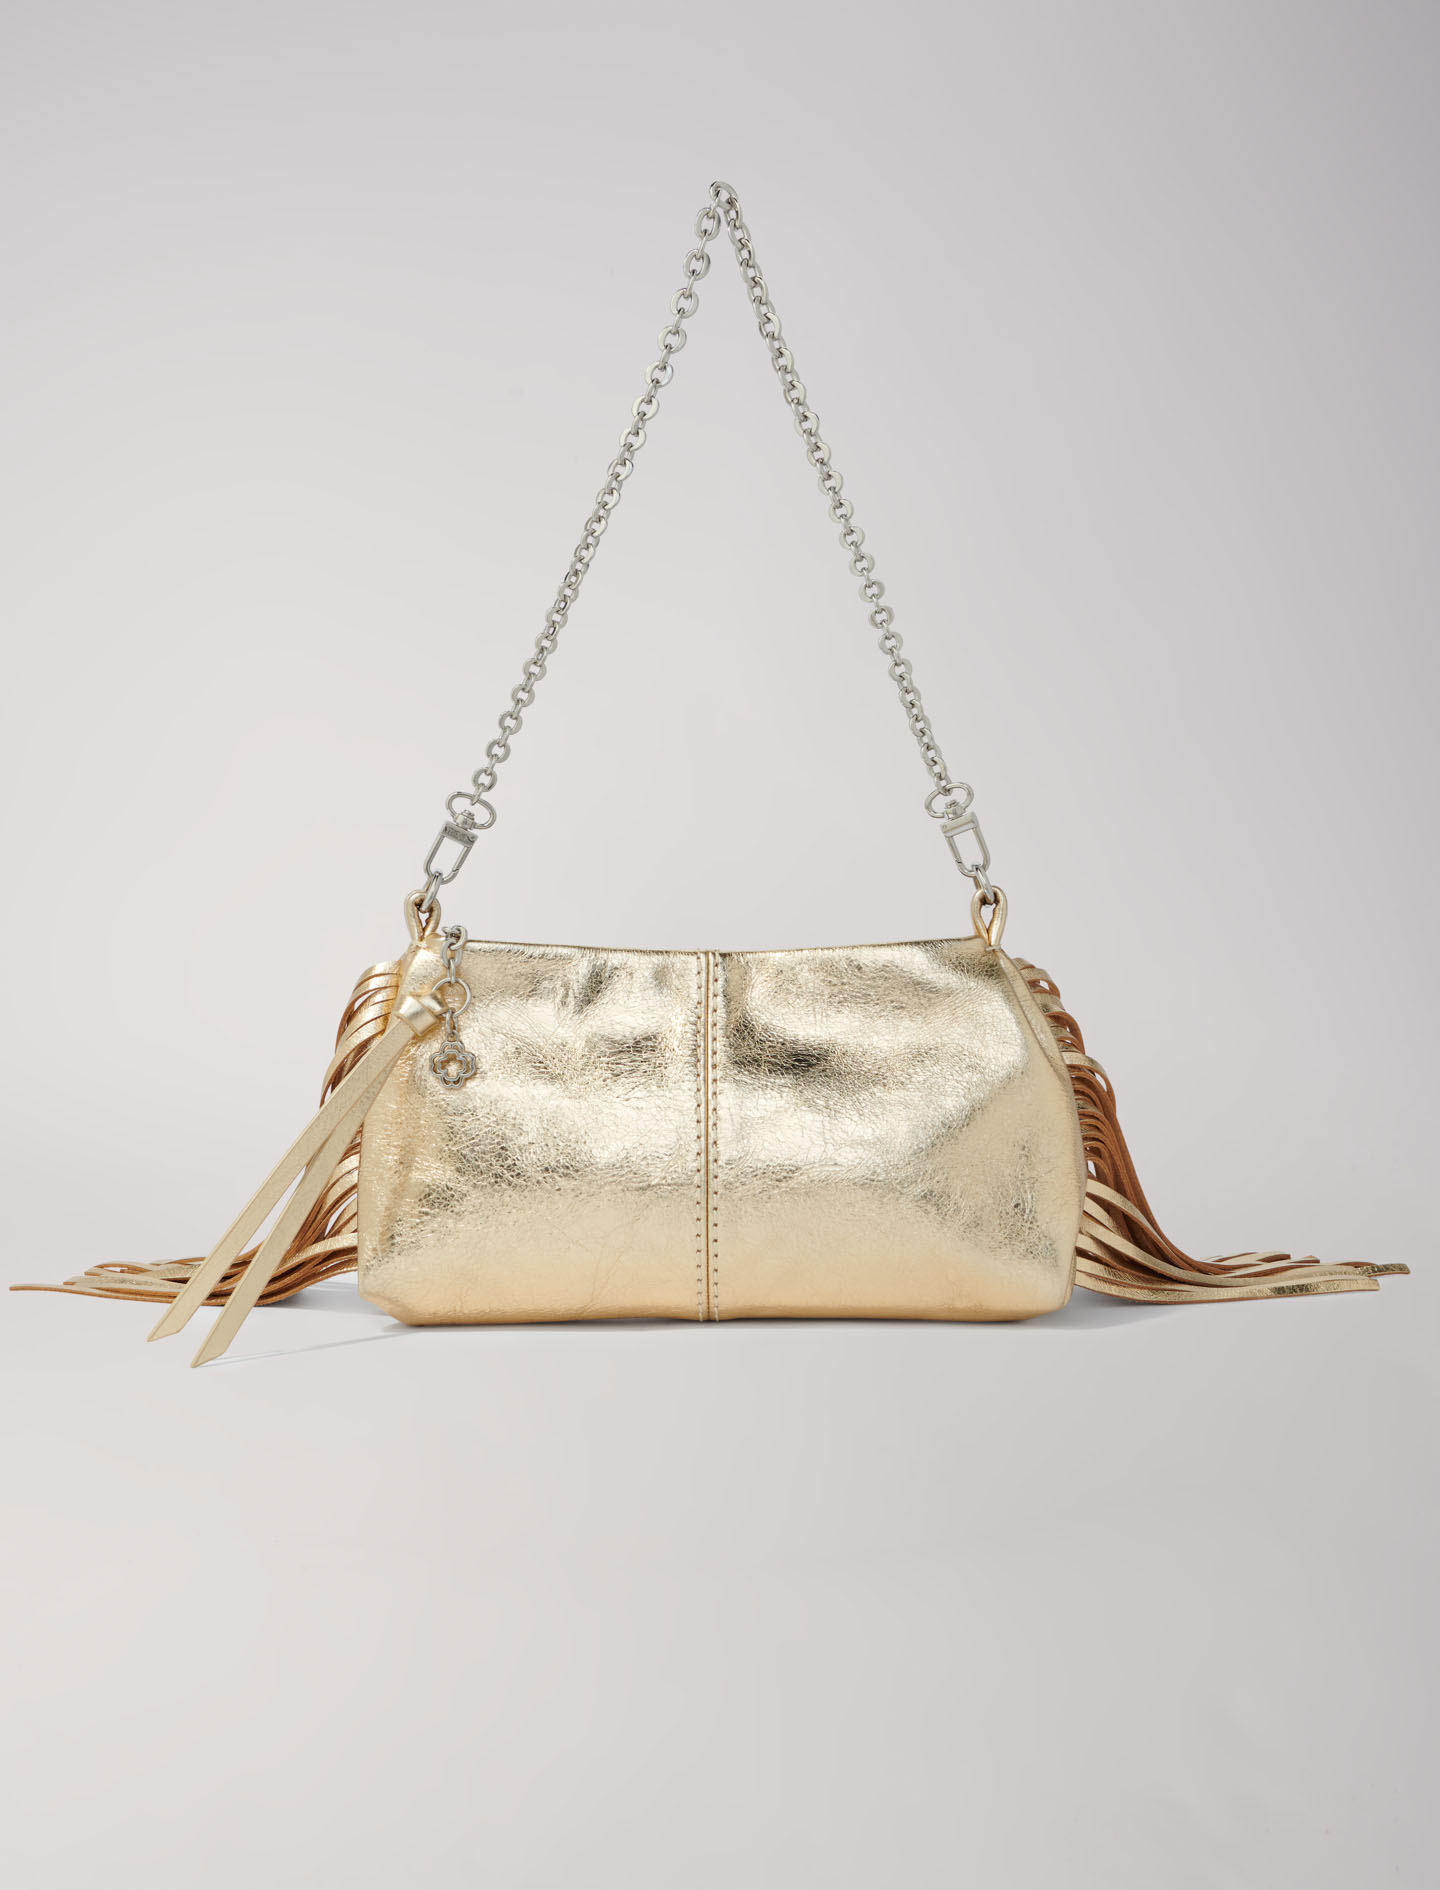 Mixte's polyester Chain: Metallic leather Miss M clutch bag, size Mixte-Small leather goods-OS (ONE SIZE), in color Gold / Yellow